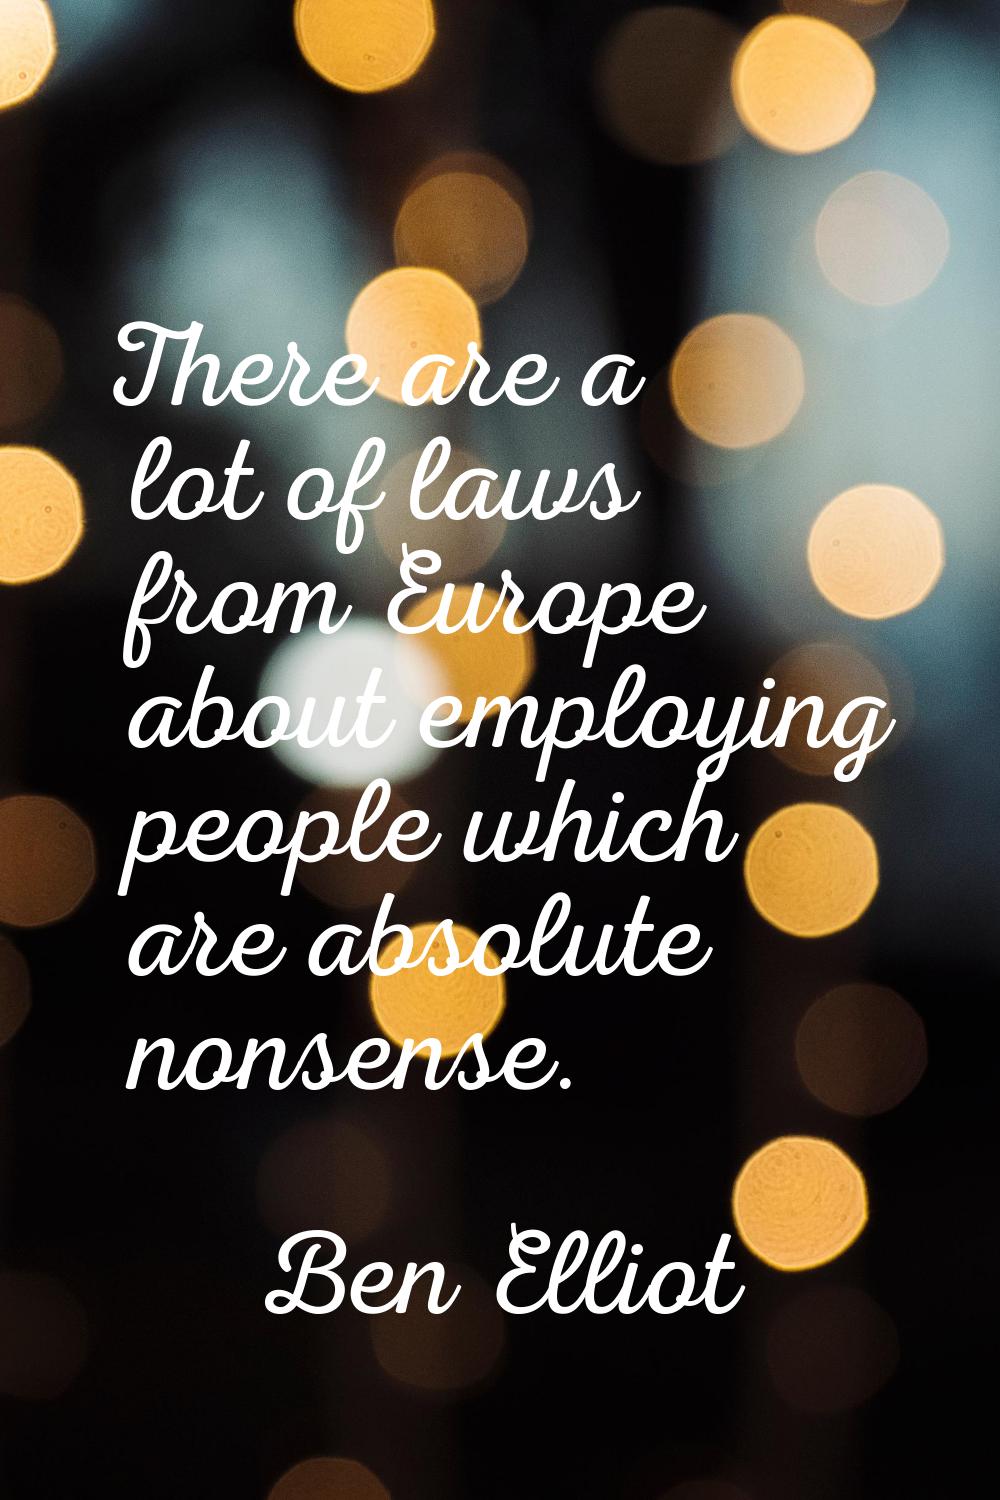 There are a lot of laws from Europe about employing people which are absolute nonsense.